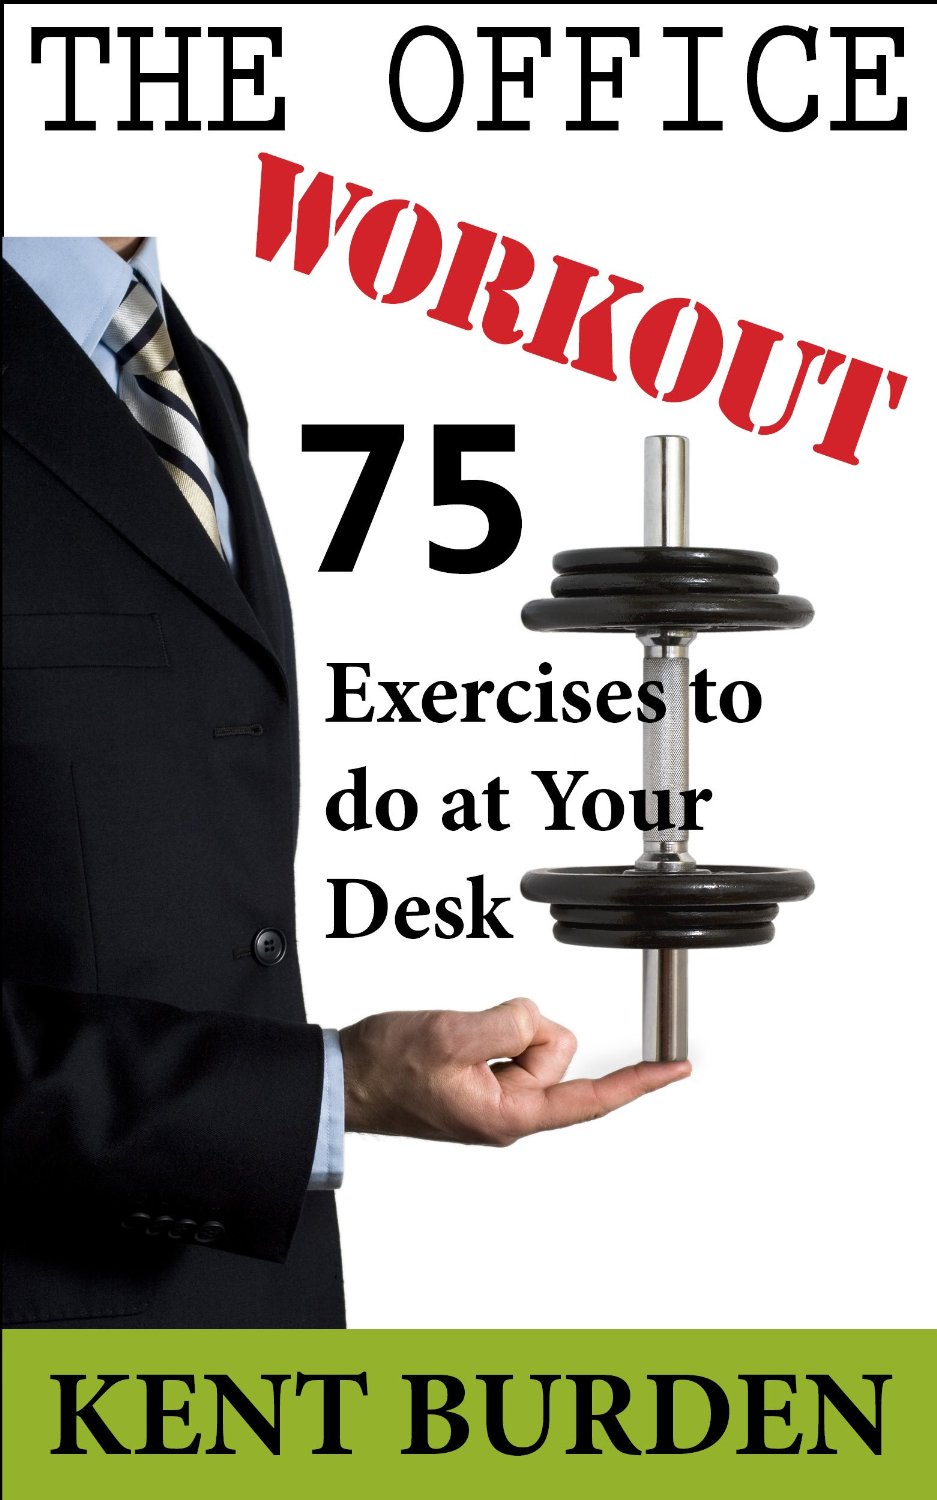 The Office Workout: 75 Exercises To Do at Your Desk by Kent Burden